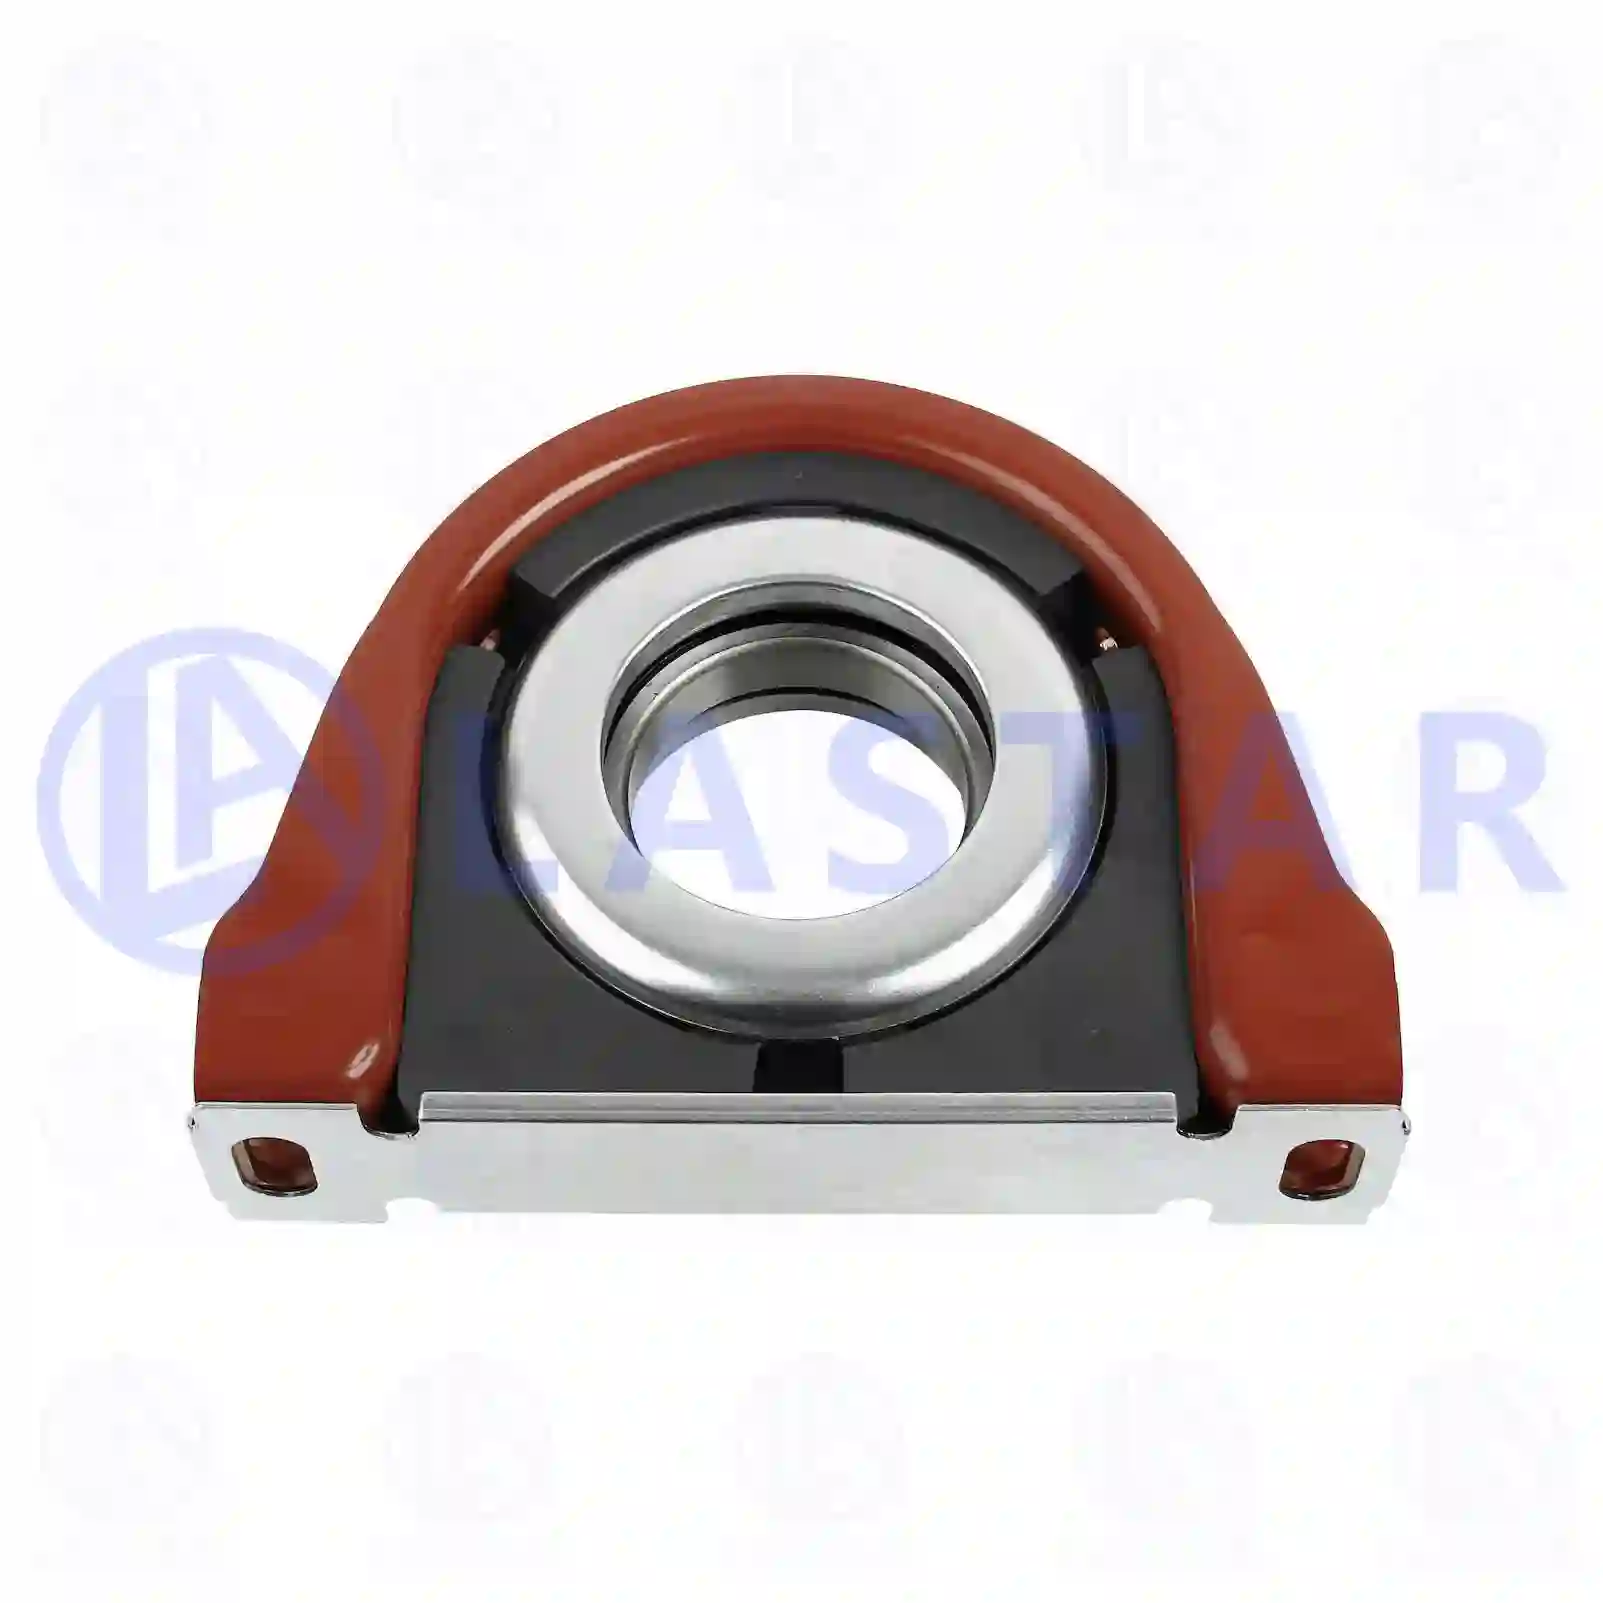 Center bearing, 77734352, 93192572 ||  77734352 Lastar Spare Part | Truck Spare Parts, Auotomotive Spare Parts Center bearing, 77734352, 93192572 ||  77734352 Lastar Spare Part | Truck Spare Parts, Auotomotive Spare Parts